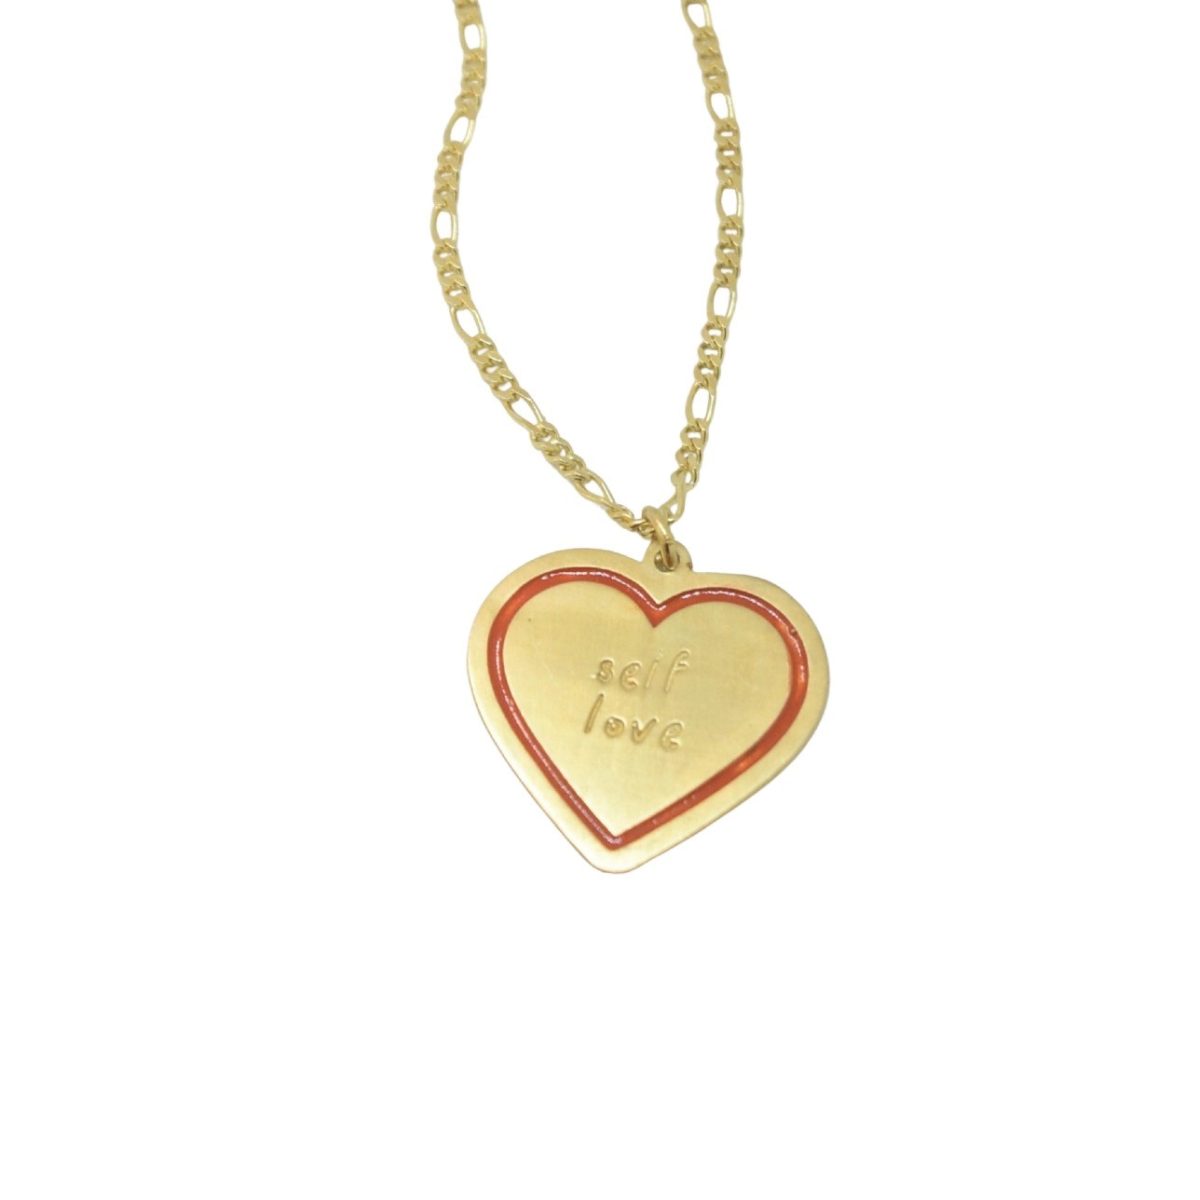 Self love gold plated necklace Self love gold plated necklace Self love gold plated necklace 5